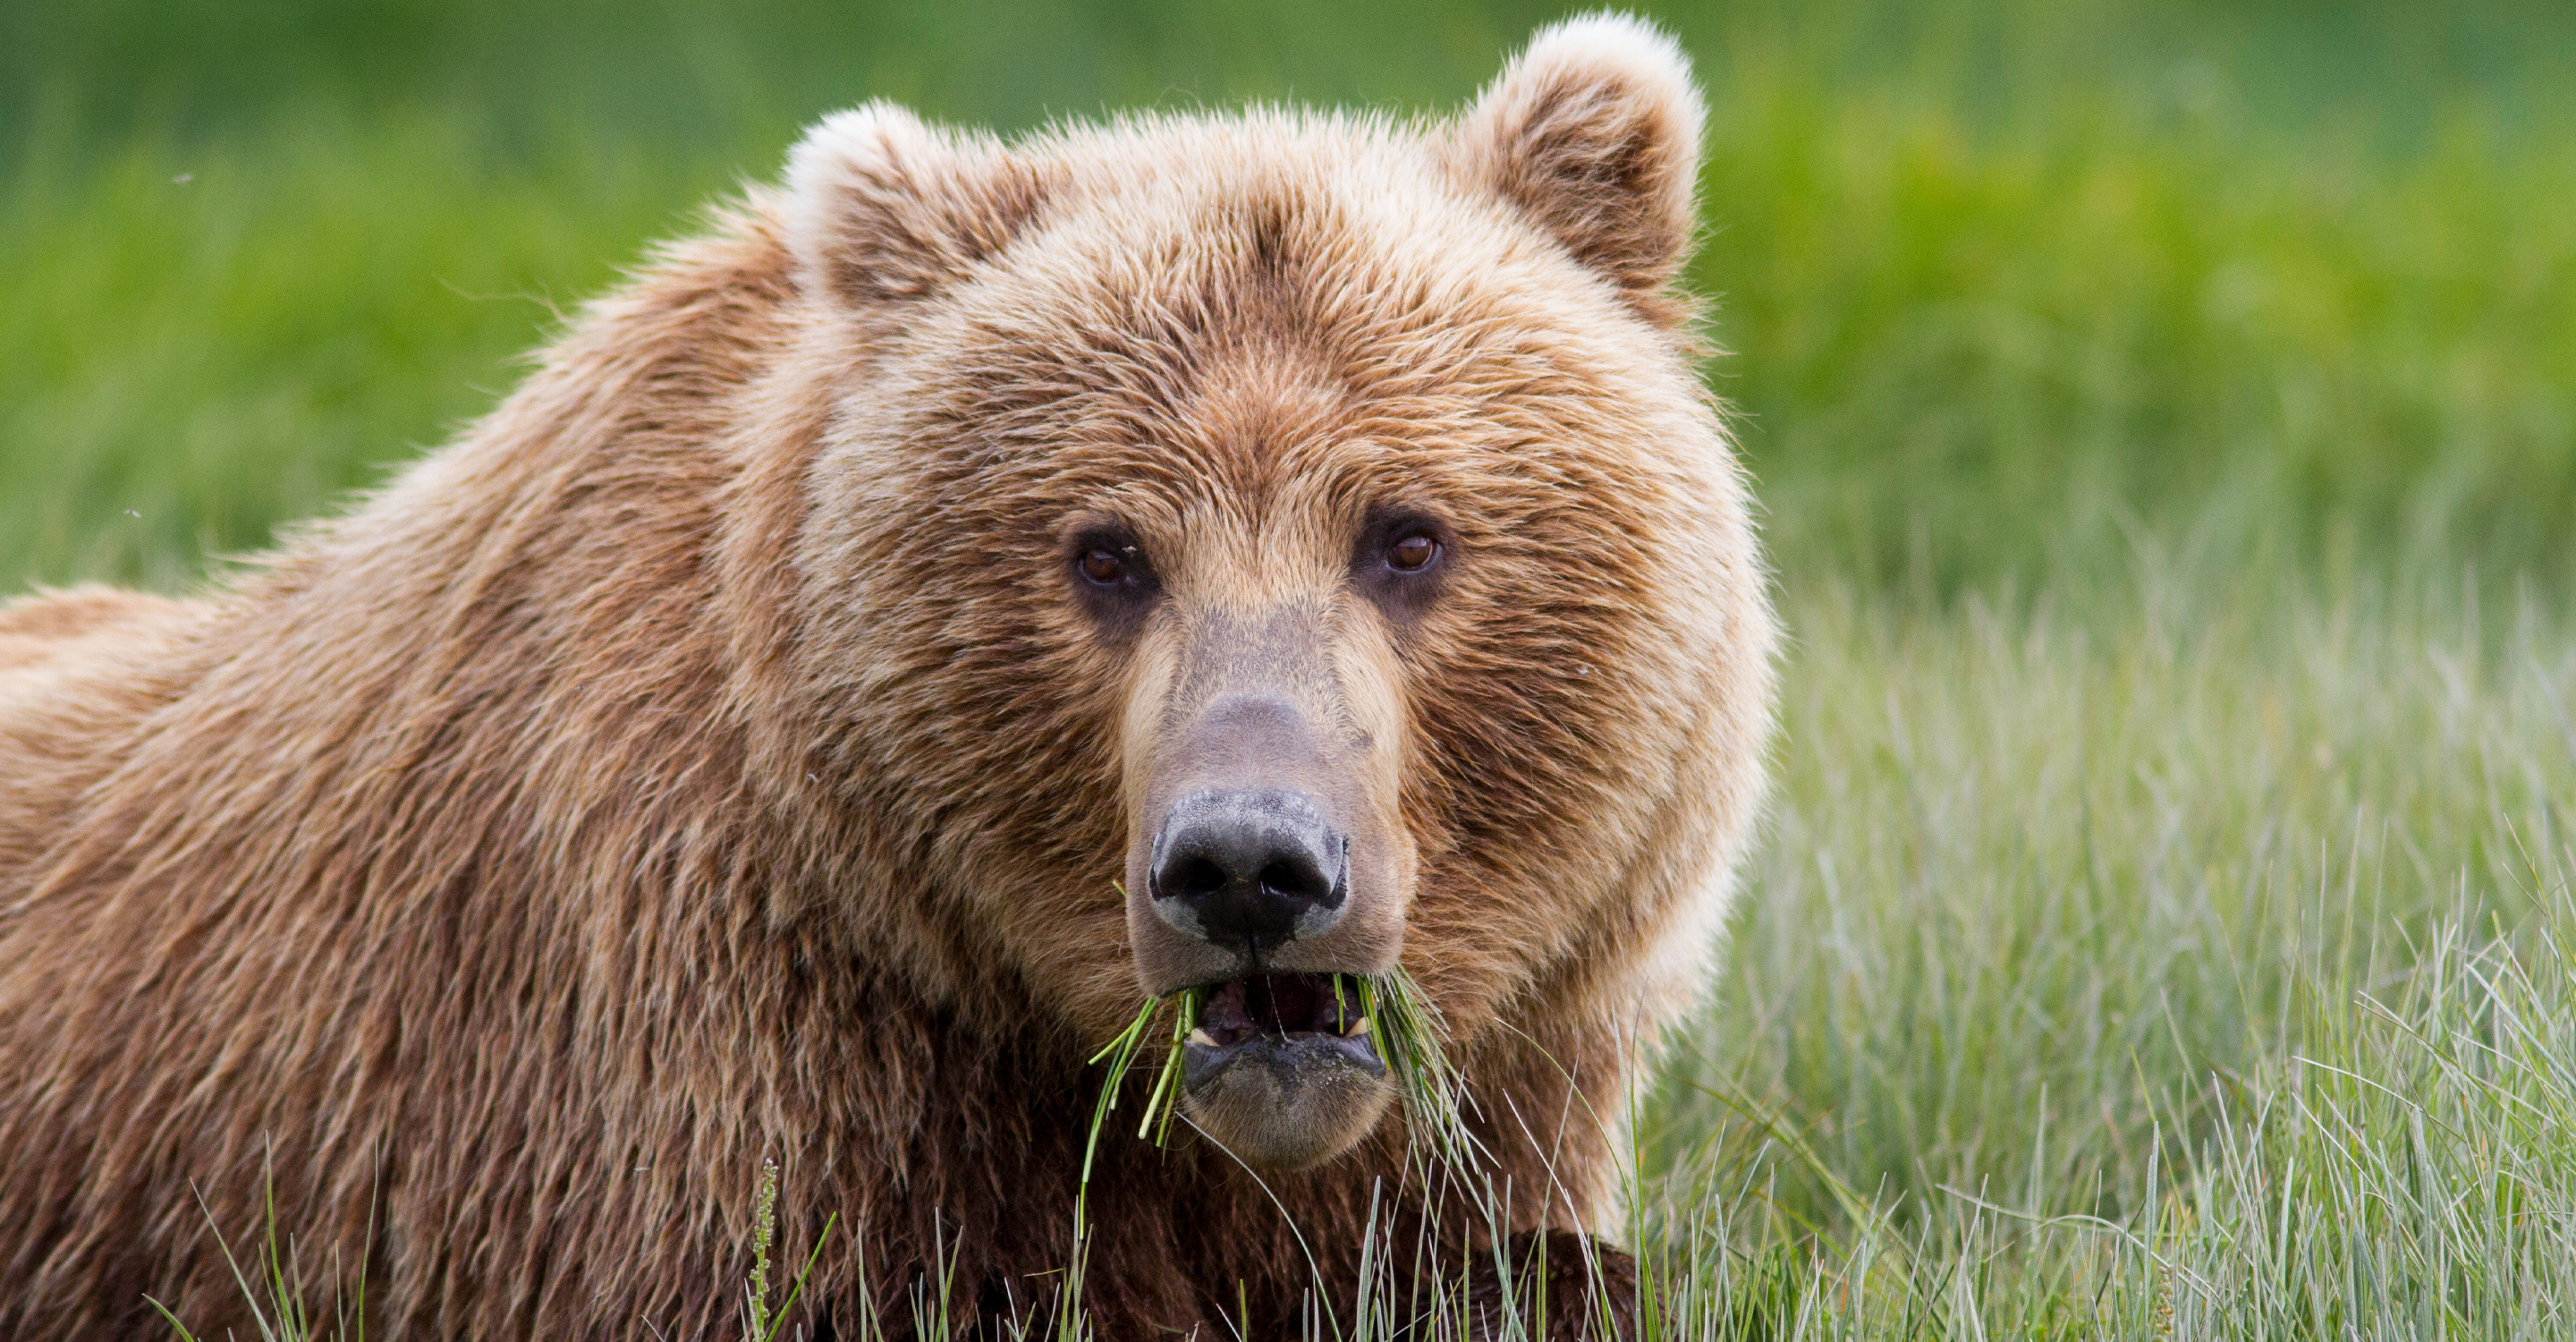 a large bear face fills the frame as it chews grass